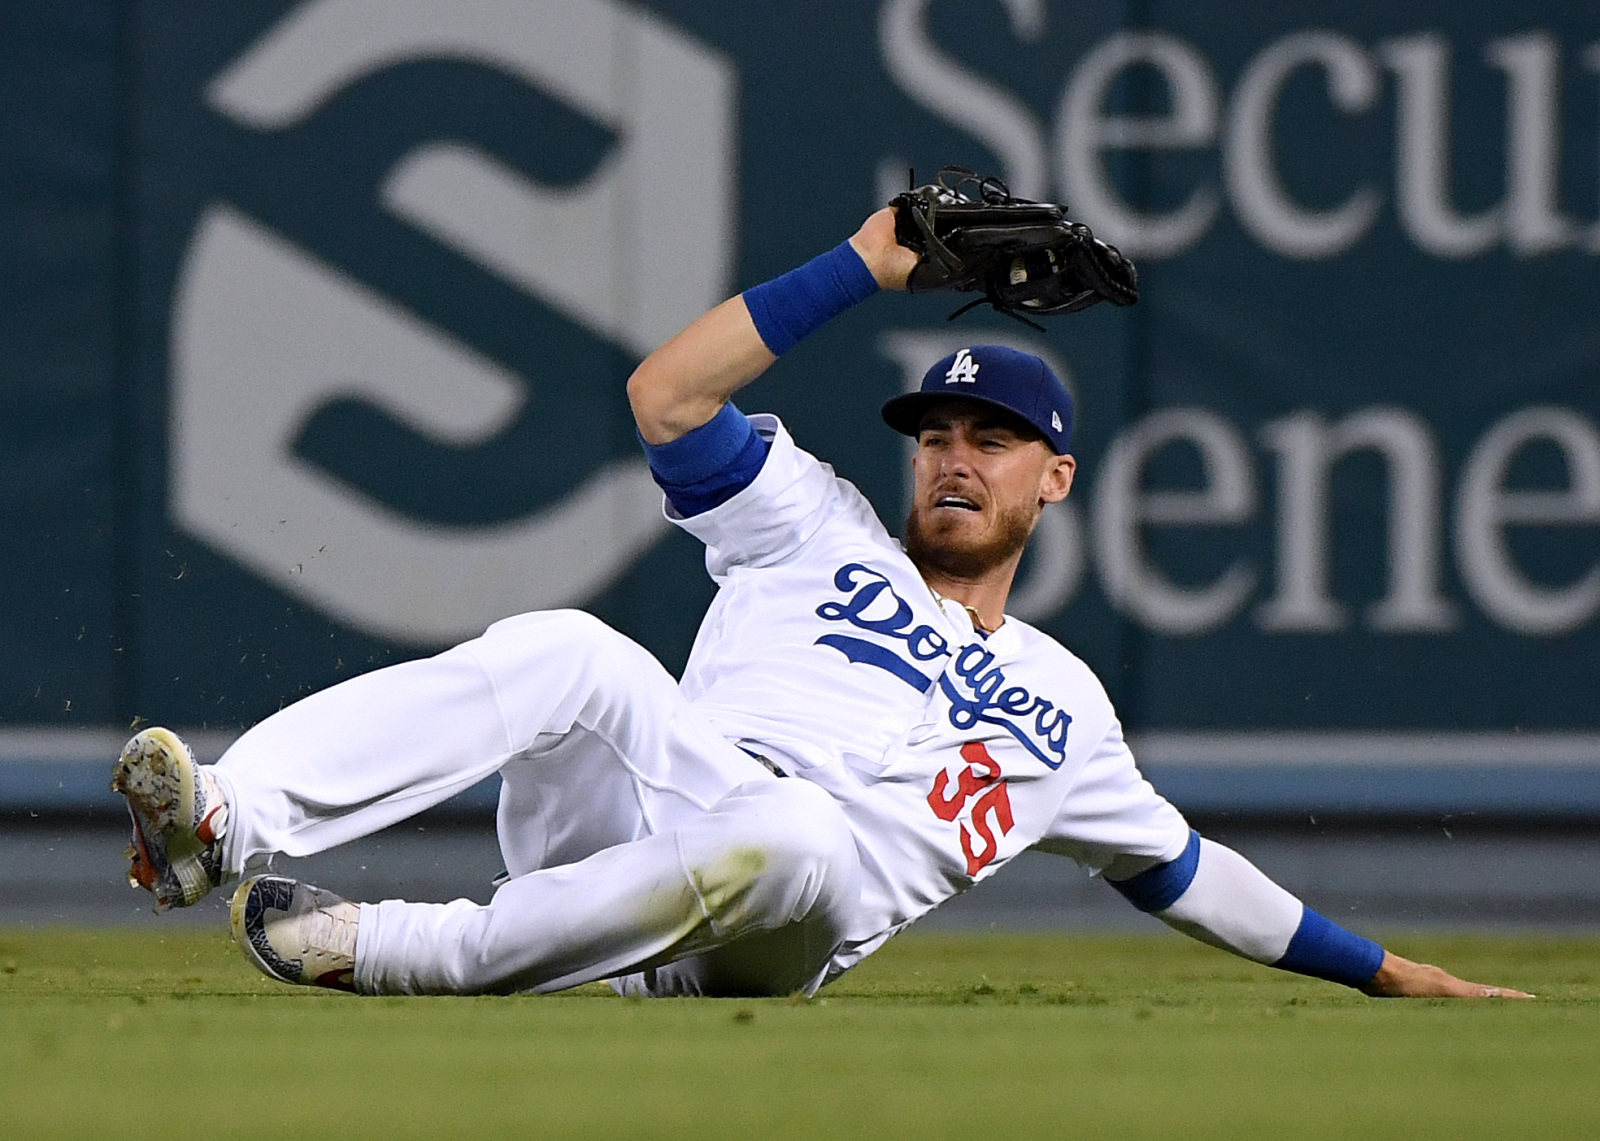 MLB: Bellinger back in CF for LA with roof closed for Game 5 - The Mainichi